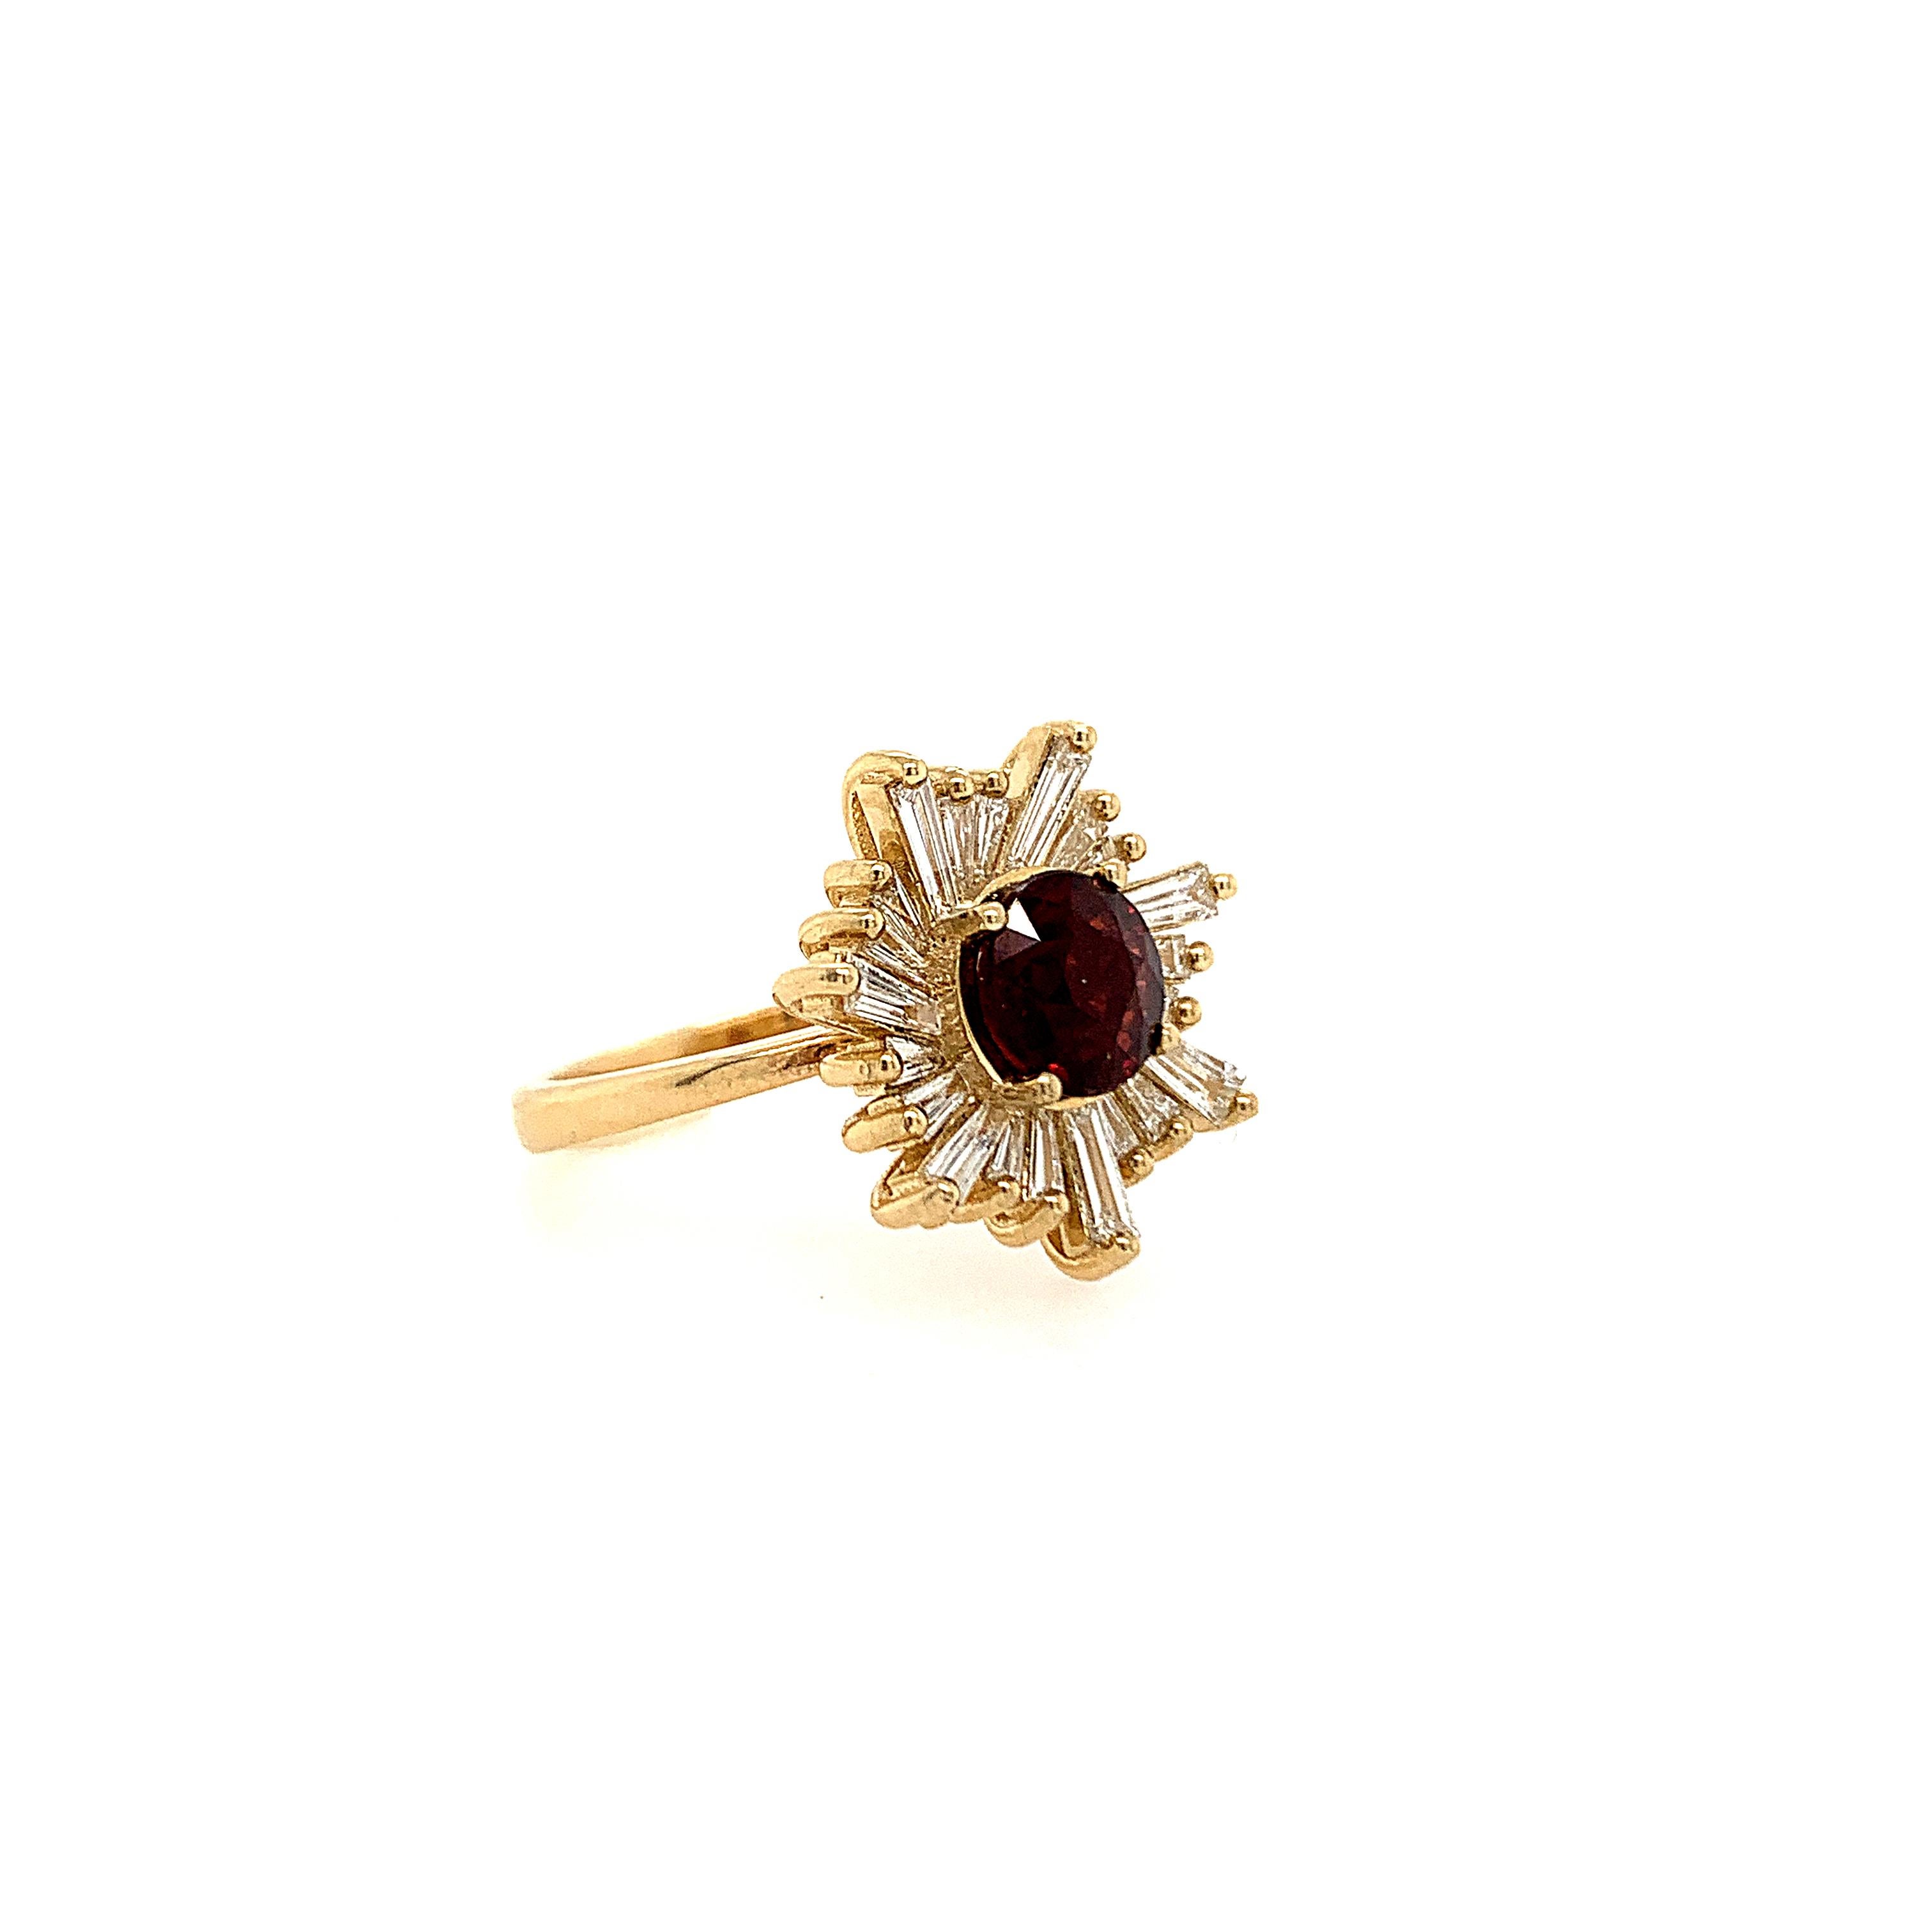 This beautiful ring flaunts a 1.38 carats round natural red Spinel set atop rays of baguette diamonds. 

Set in 14K yellow gold. 

Center stone: Natural red Spinel - 1.38 carat.

Accent stones: Natural baguette diamonds - 0.79 carat. 

2.17 total